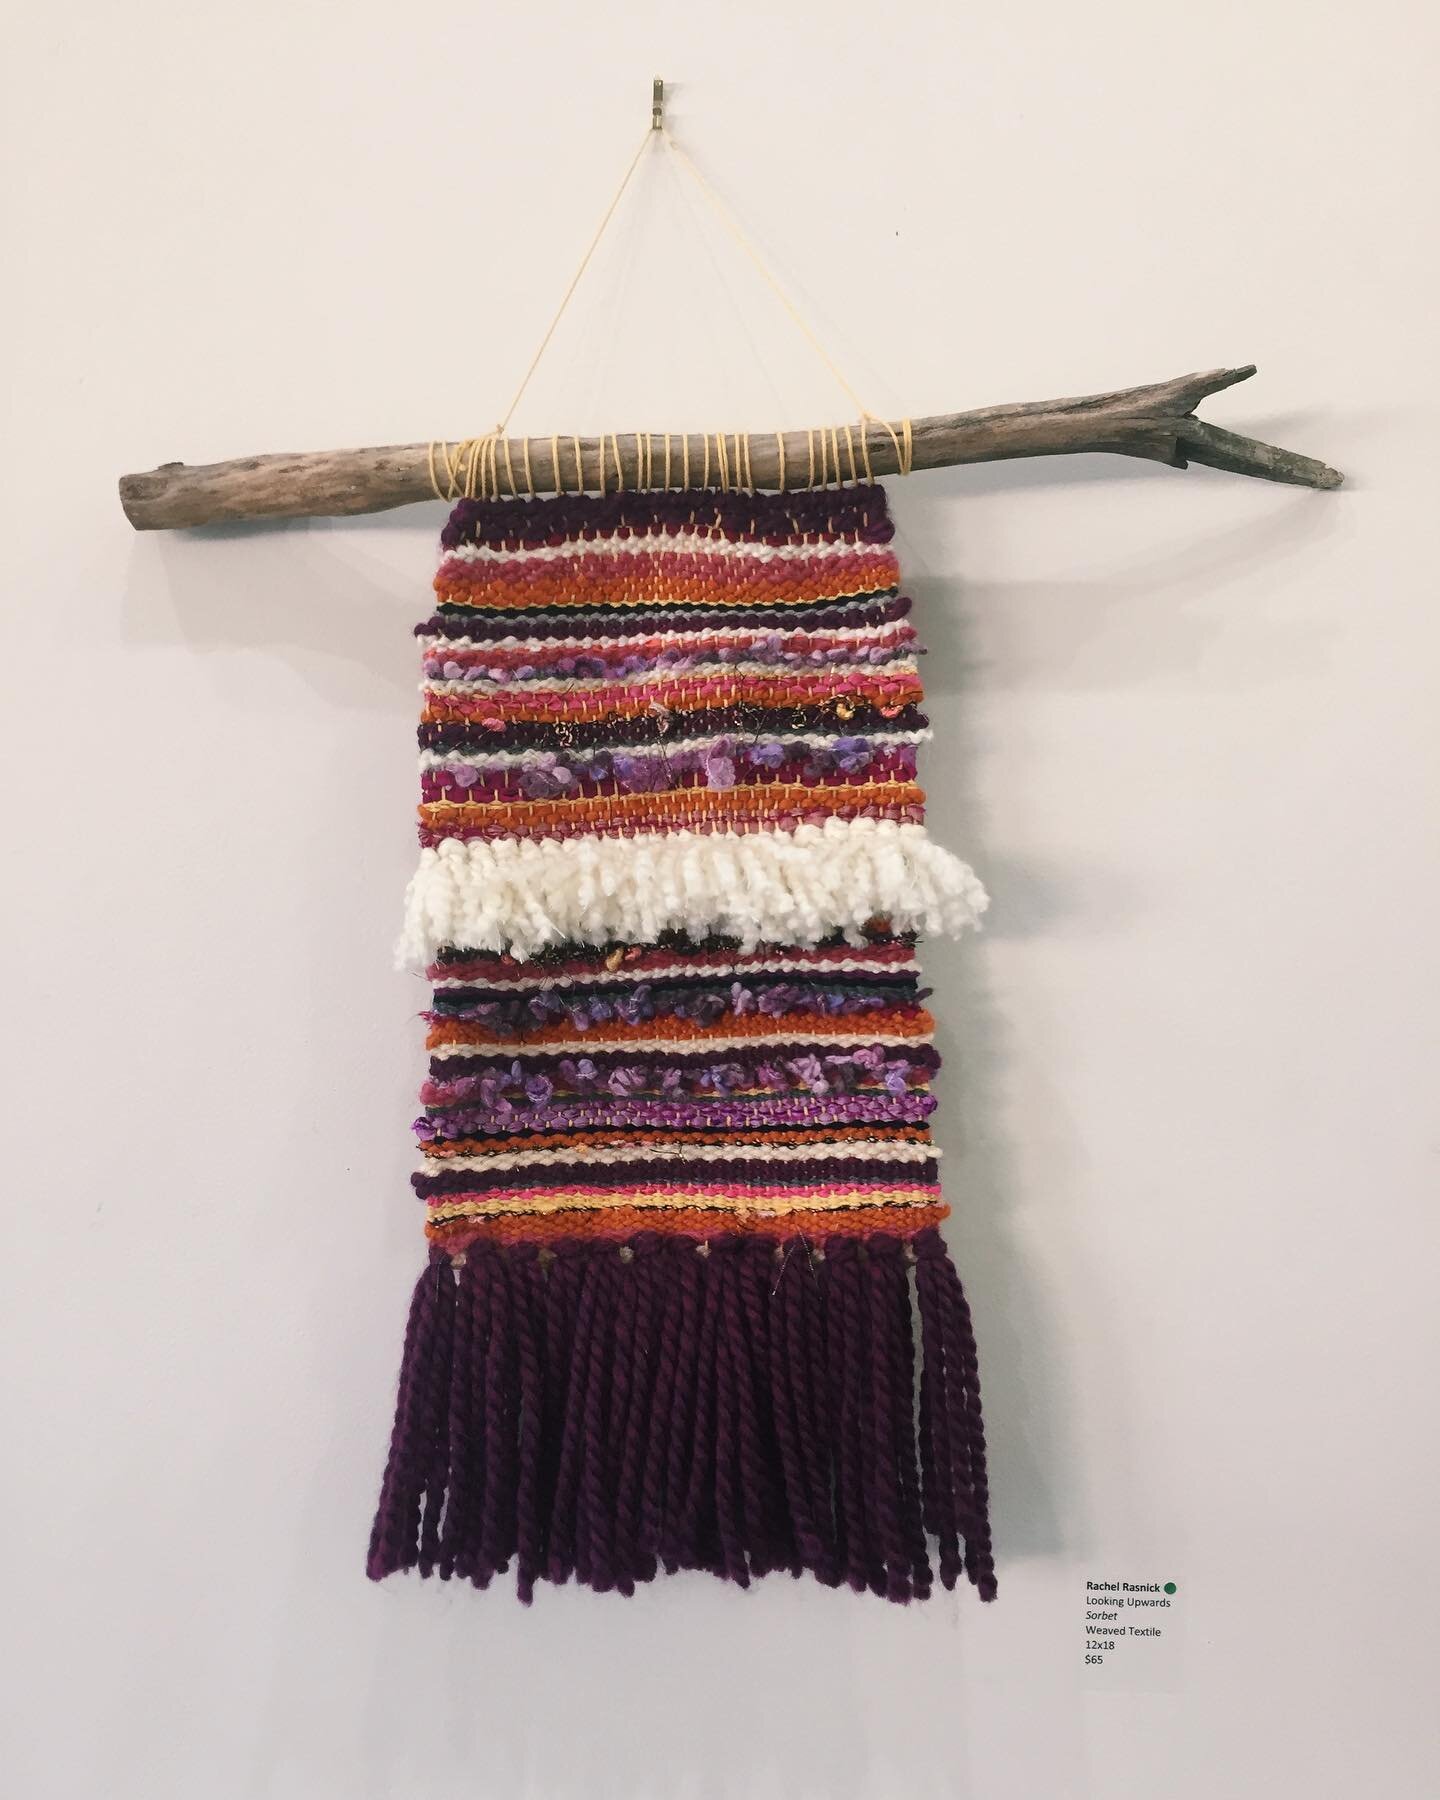 Finally got a chance to visit the &ldquo;Weaving Together&rdquo; exhibit at the @jamestownartscenter where some of my pieces are displayed. The exhibit is open until March 13!